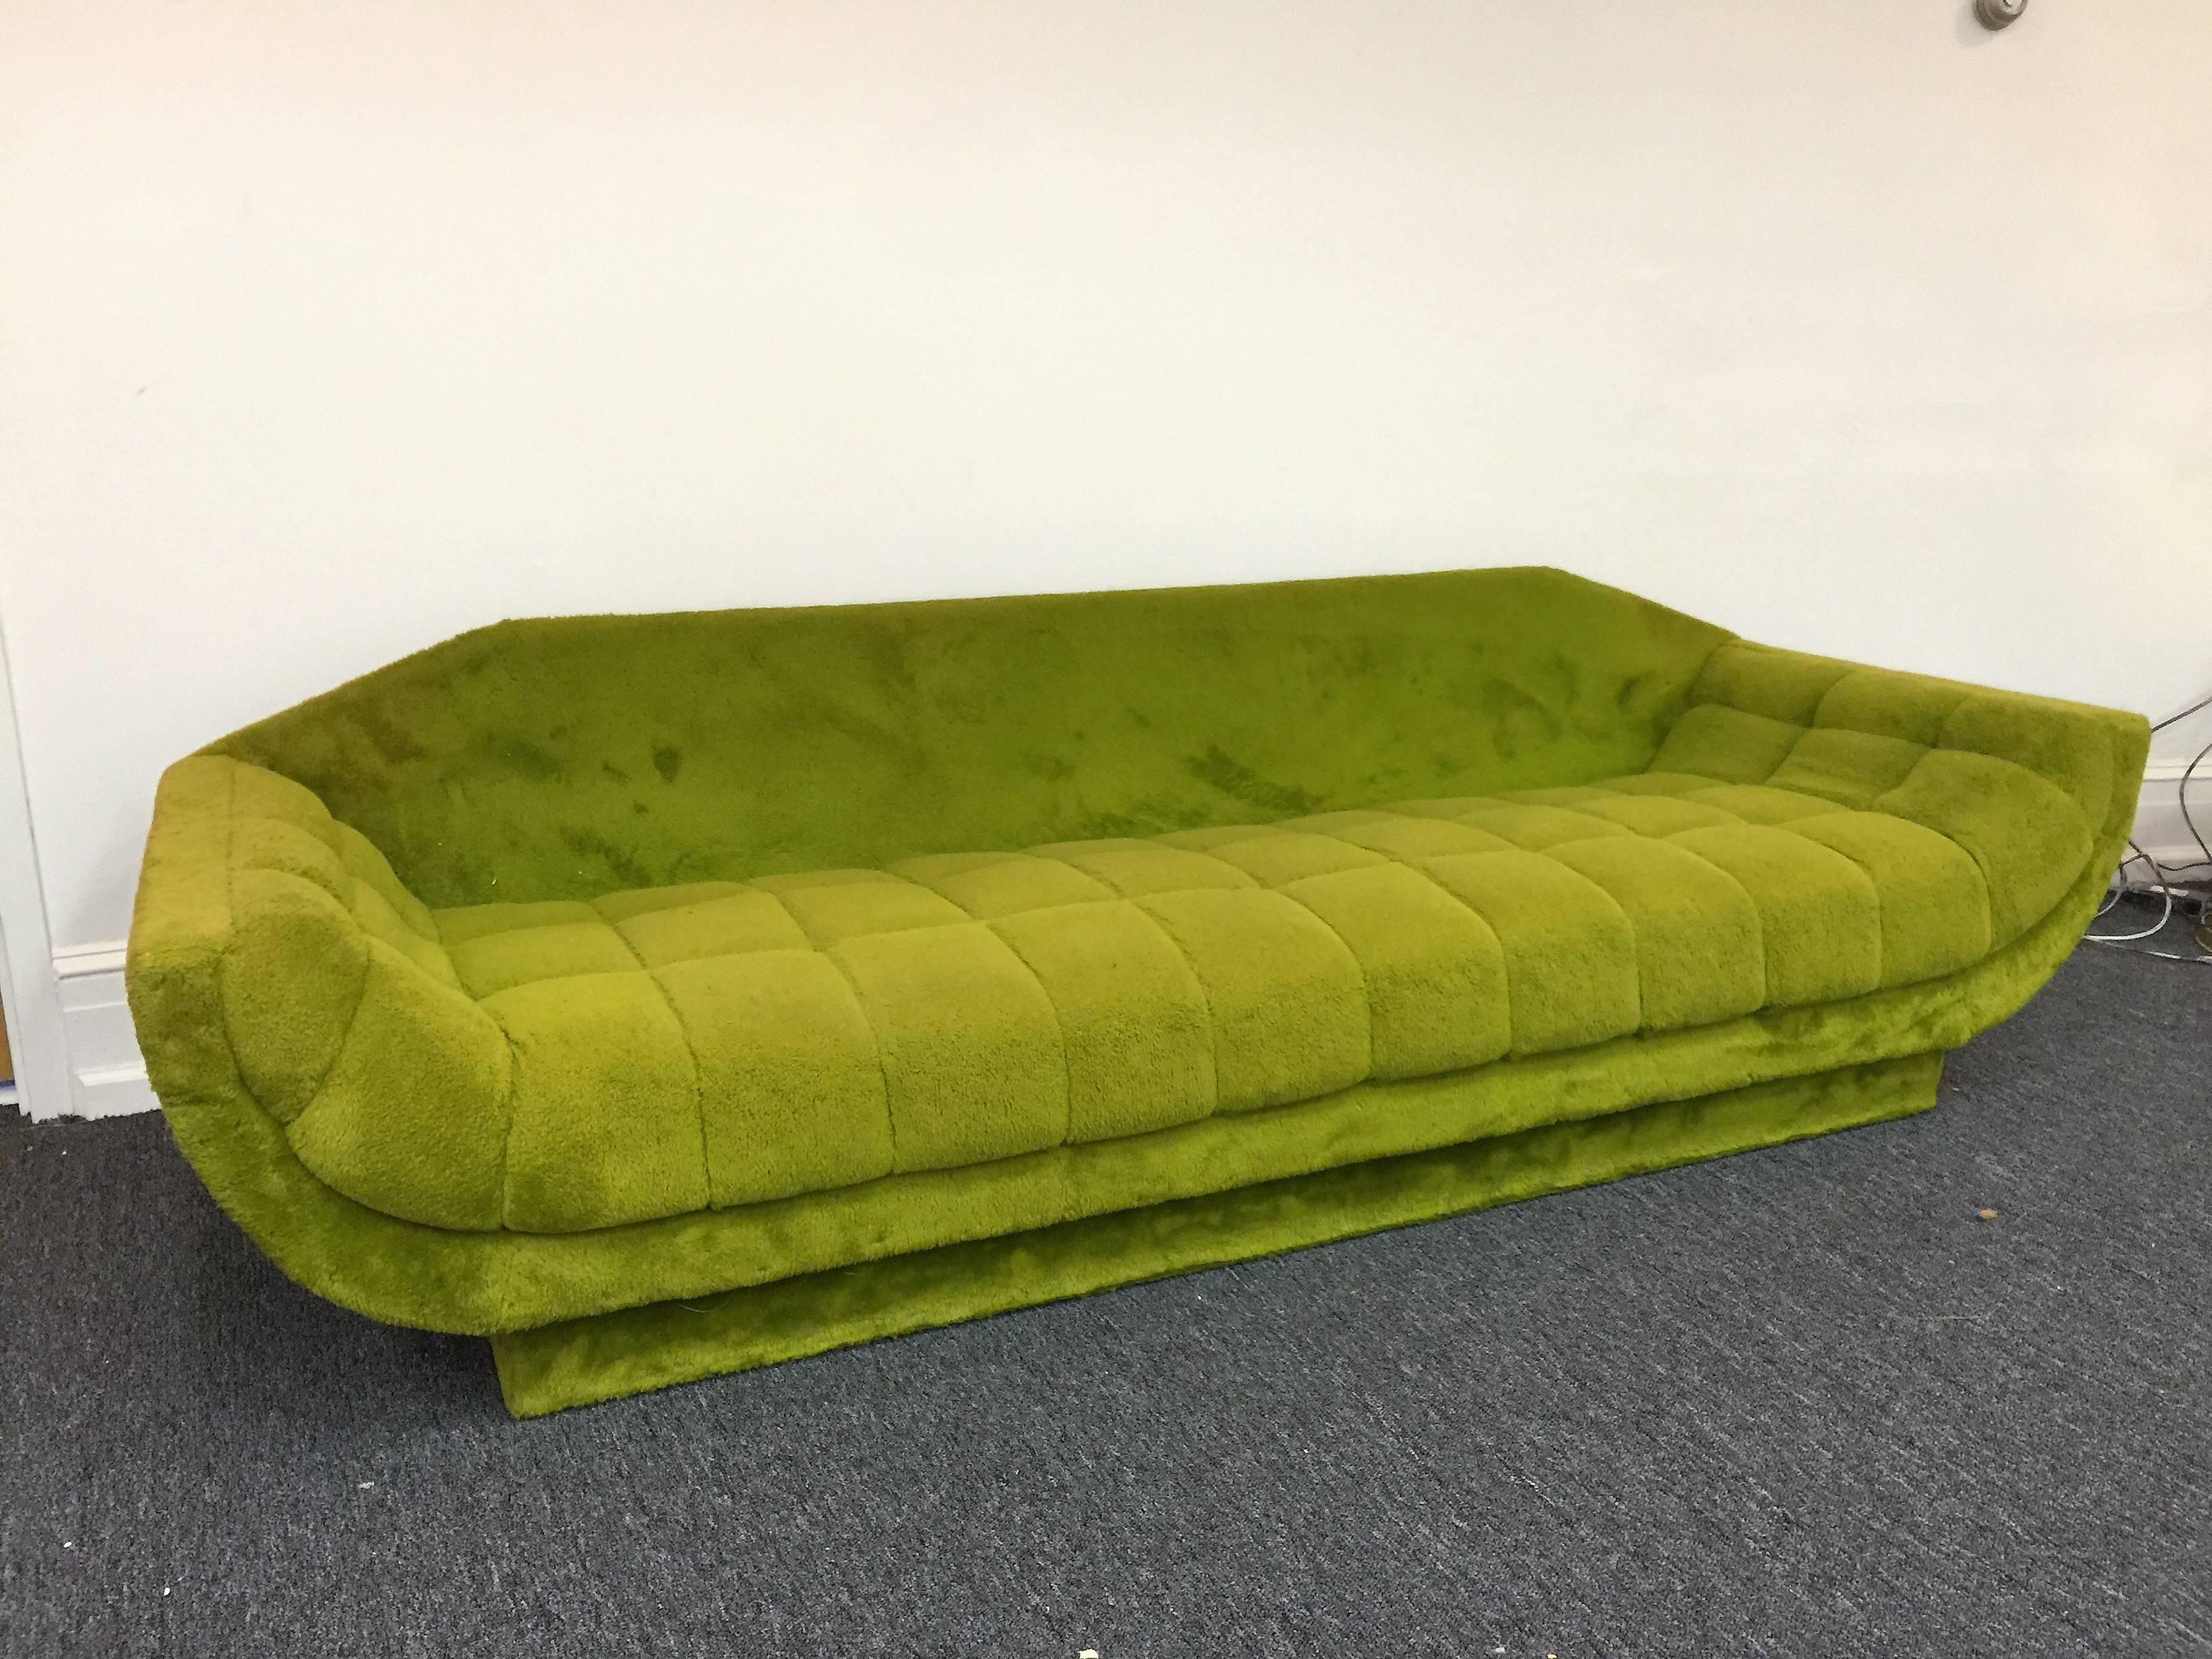 Great shape fabric waffle design upholstered couch made by Adrian Pearsall,
during the 1970s. In Wonderful shape ready to enter a high end modern interior.